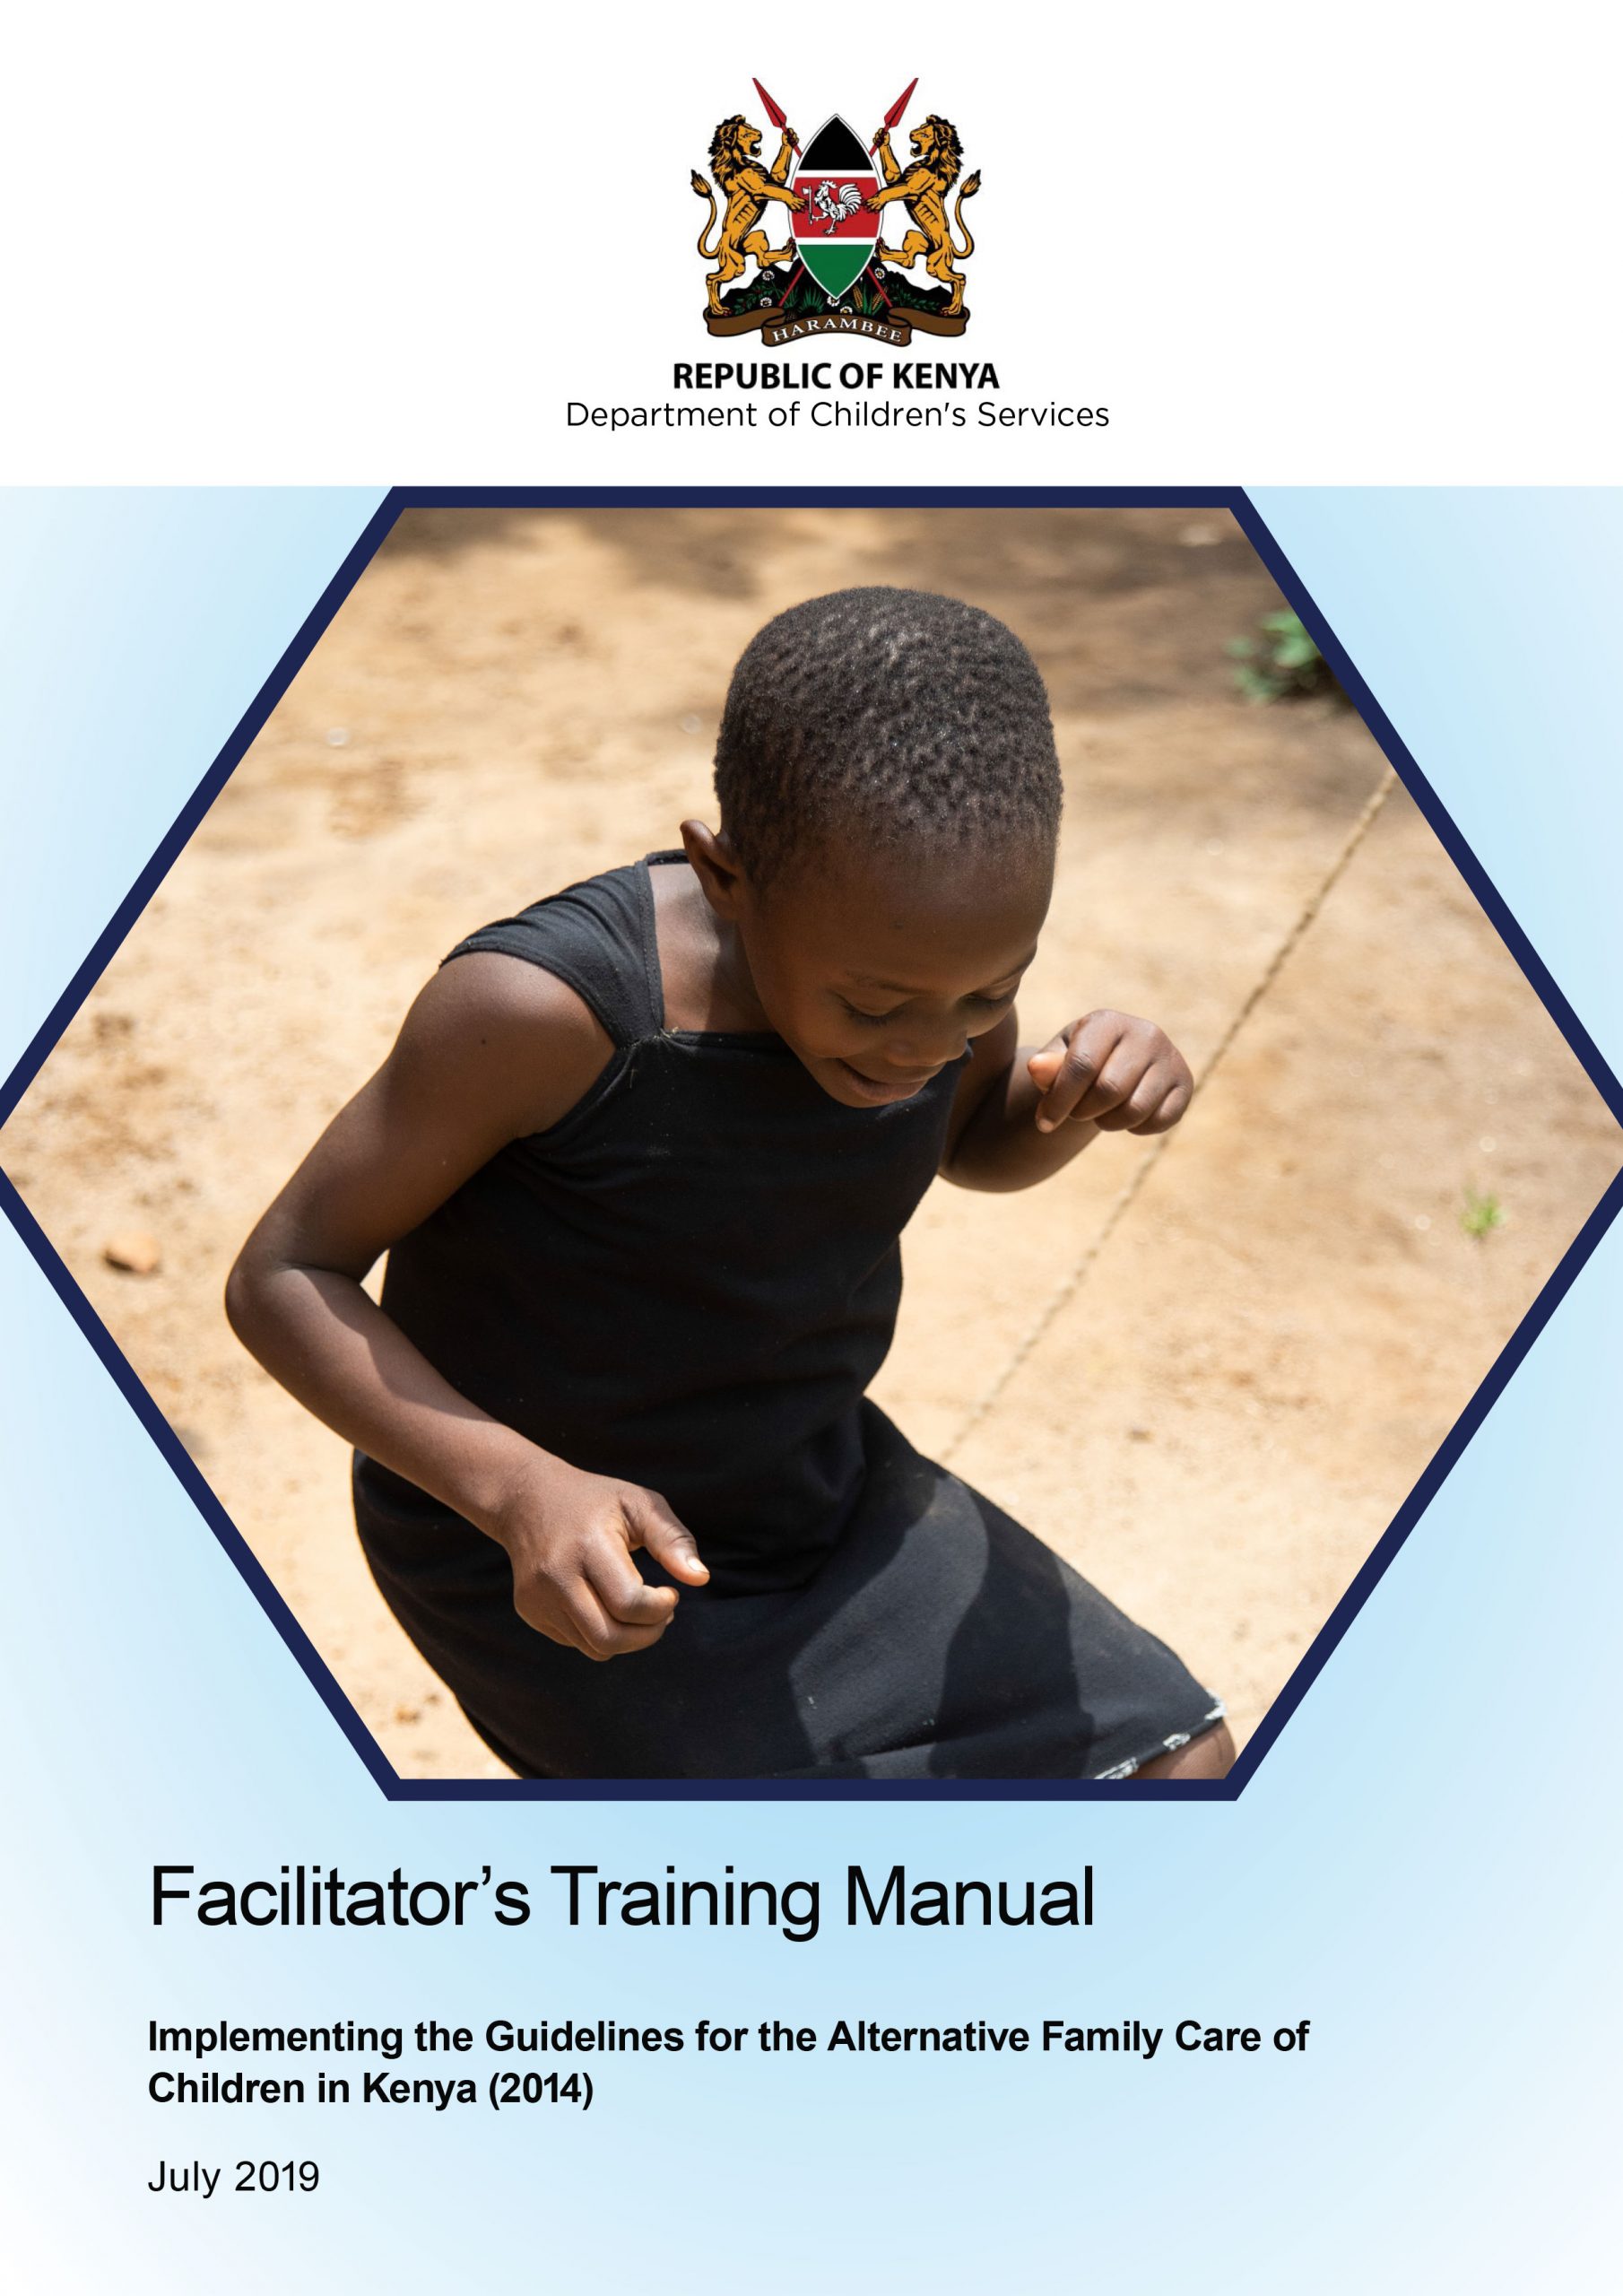 Implementing the Guidelines for the Alternative Family Care of Children in Kenya (2014) - Facilitator’s Training Manual